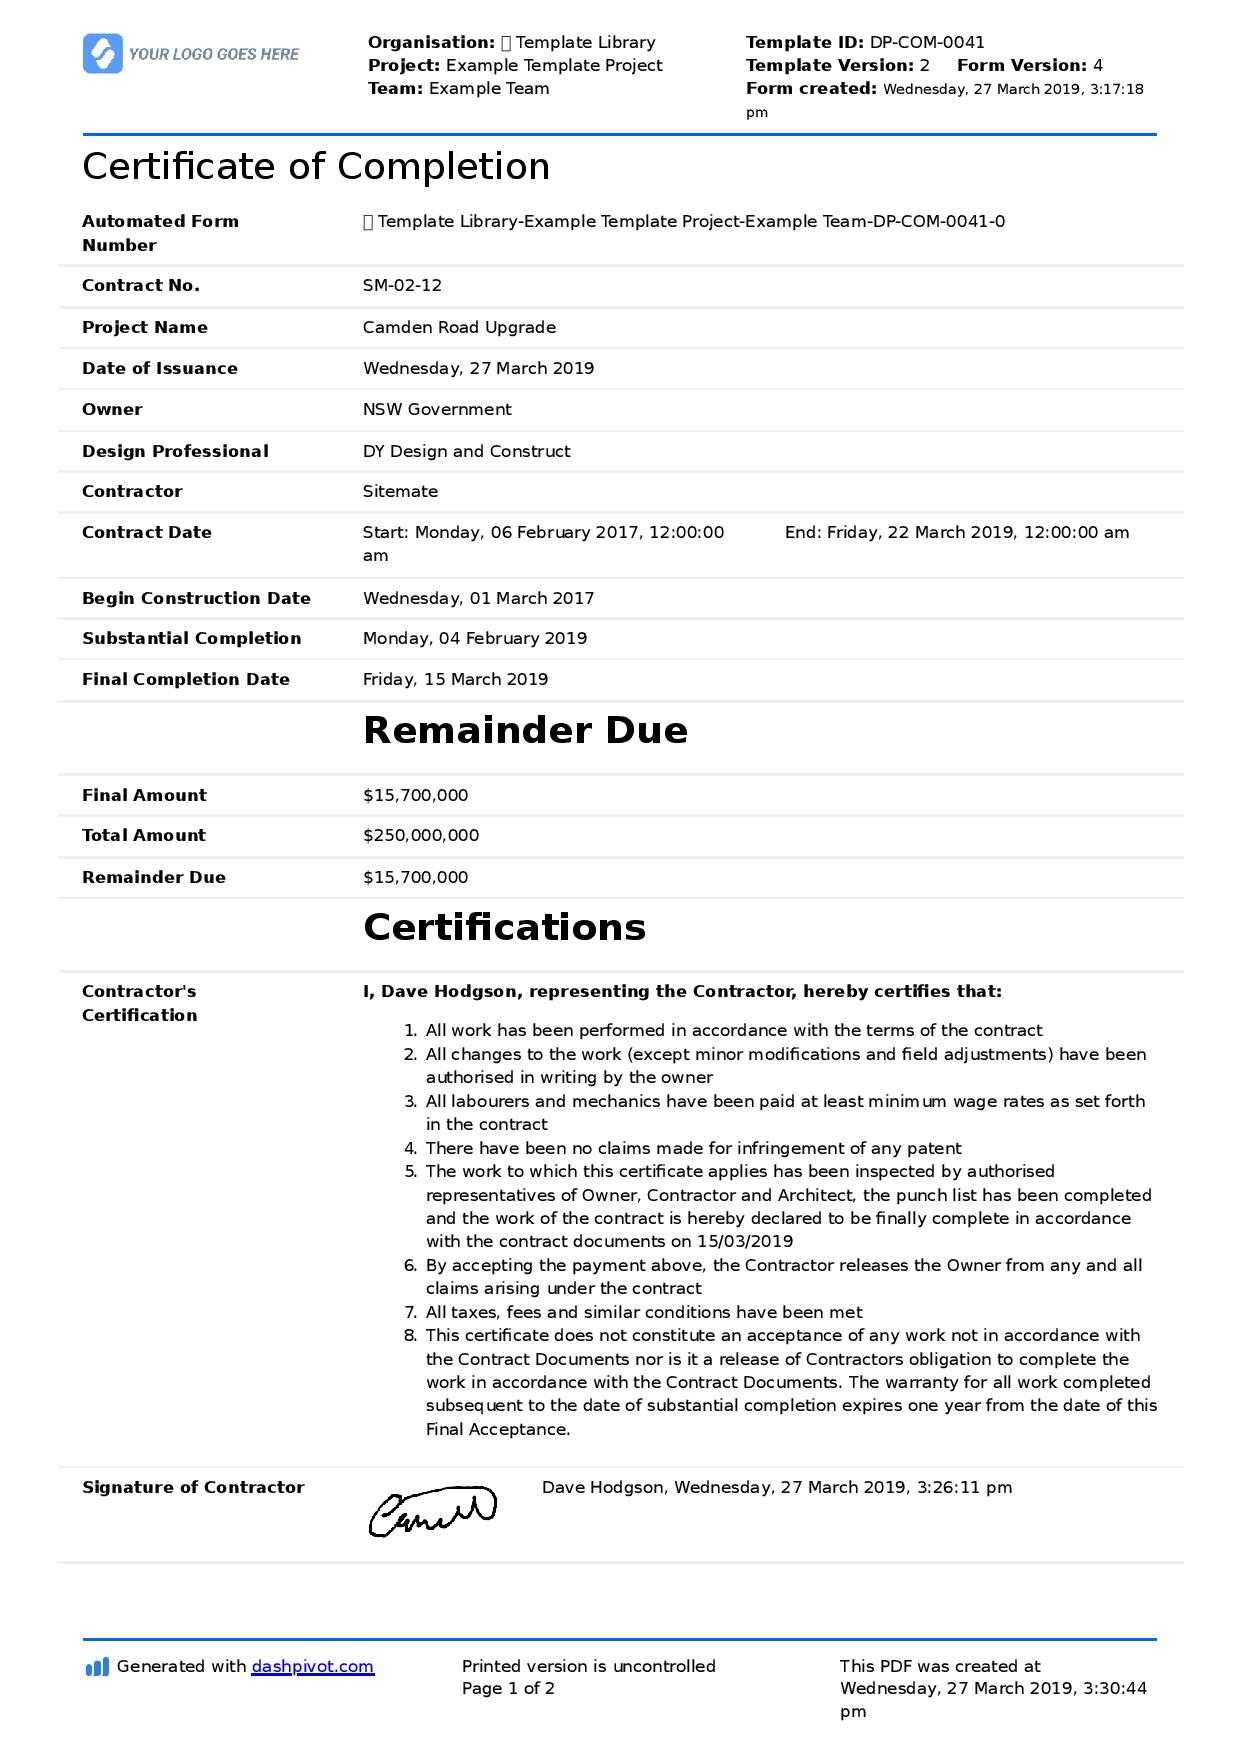 Sample Of Certificate Of Completion Of Construction Project With Regard To Jct Practical Completion Certificate Template